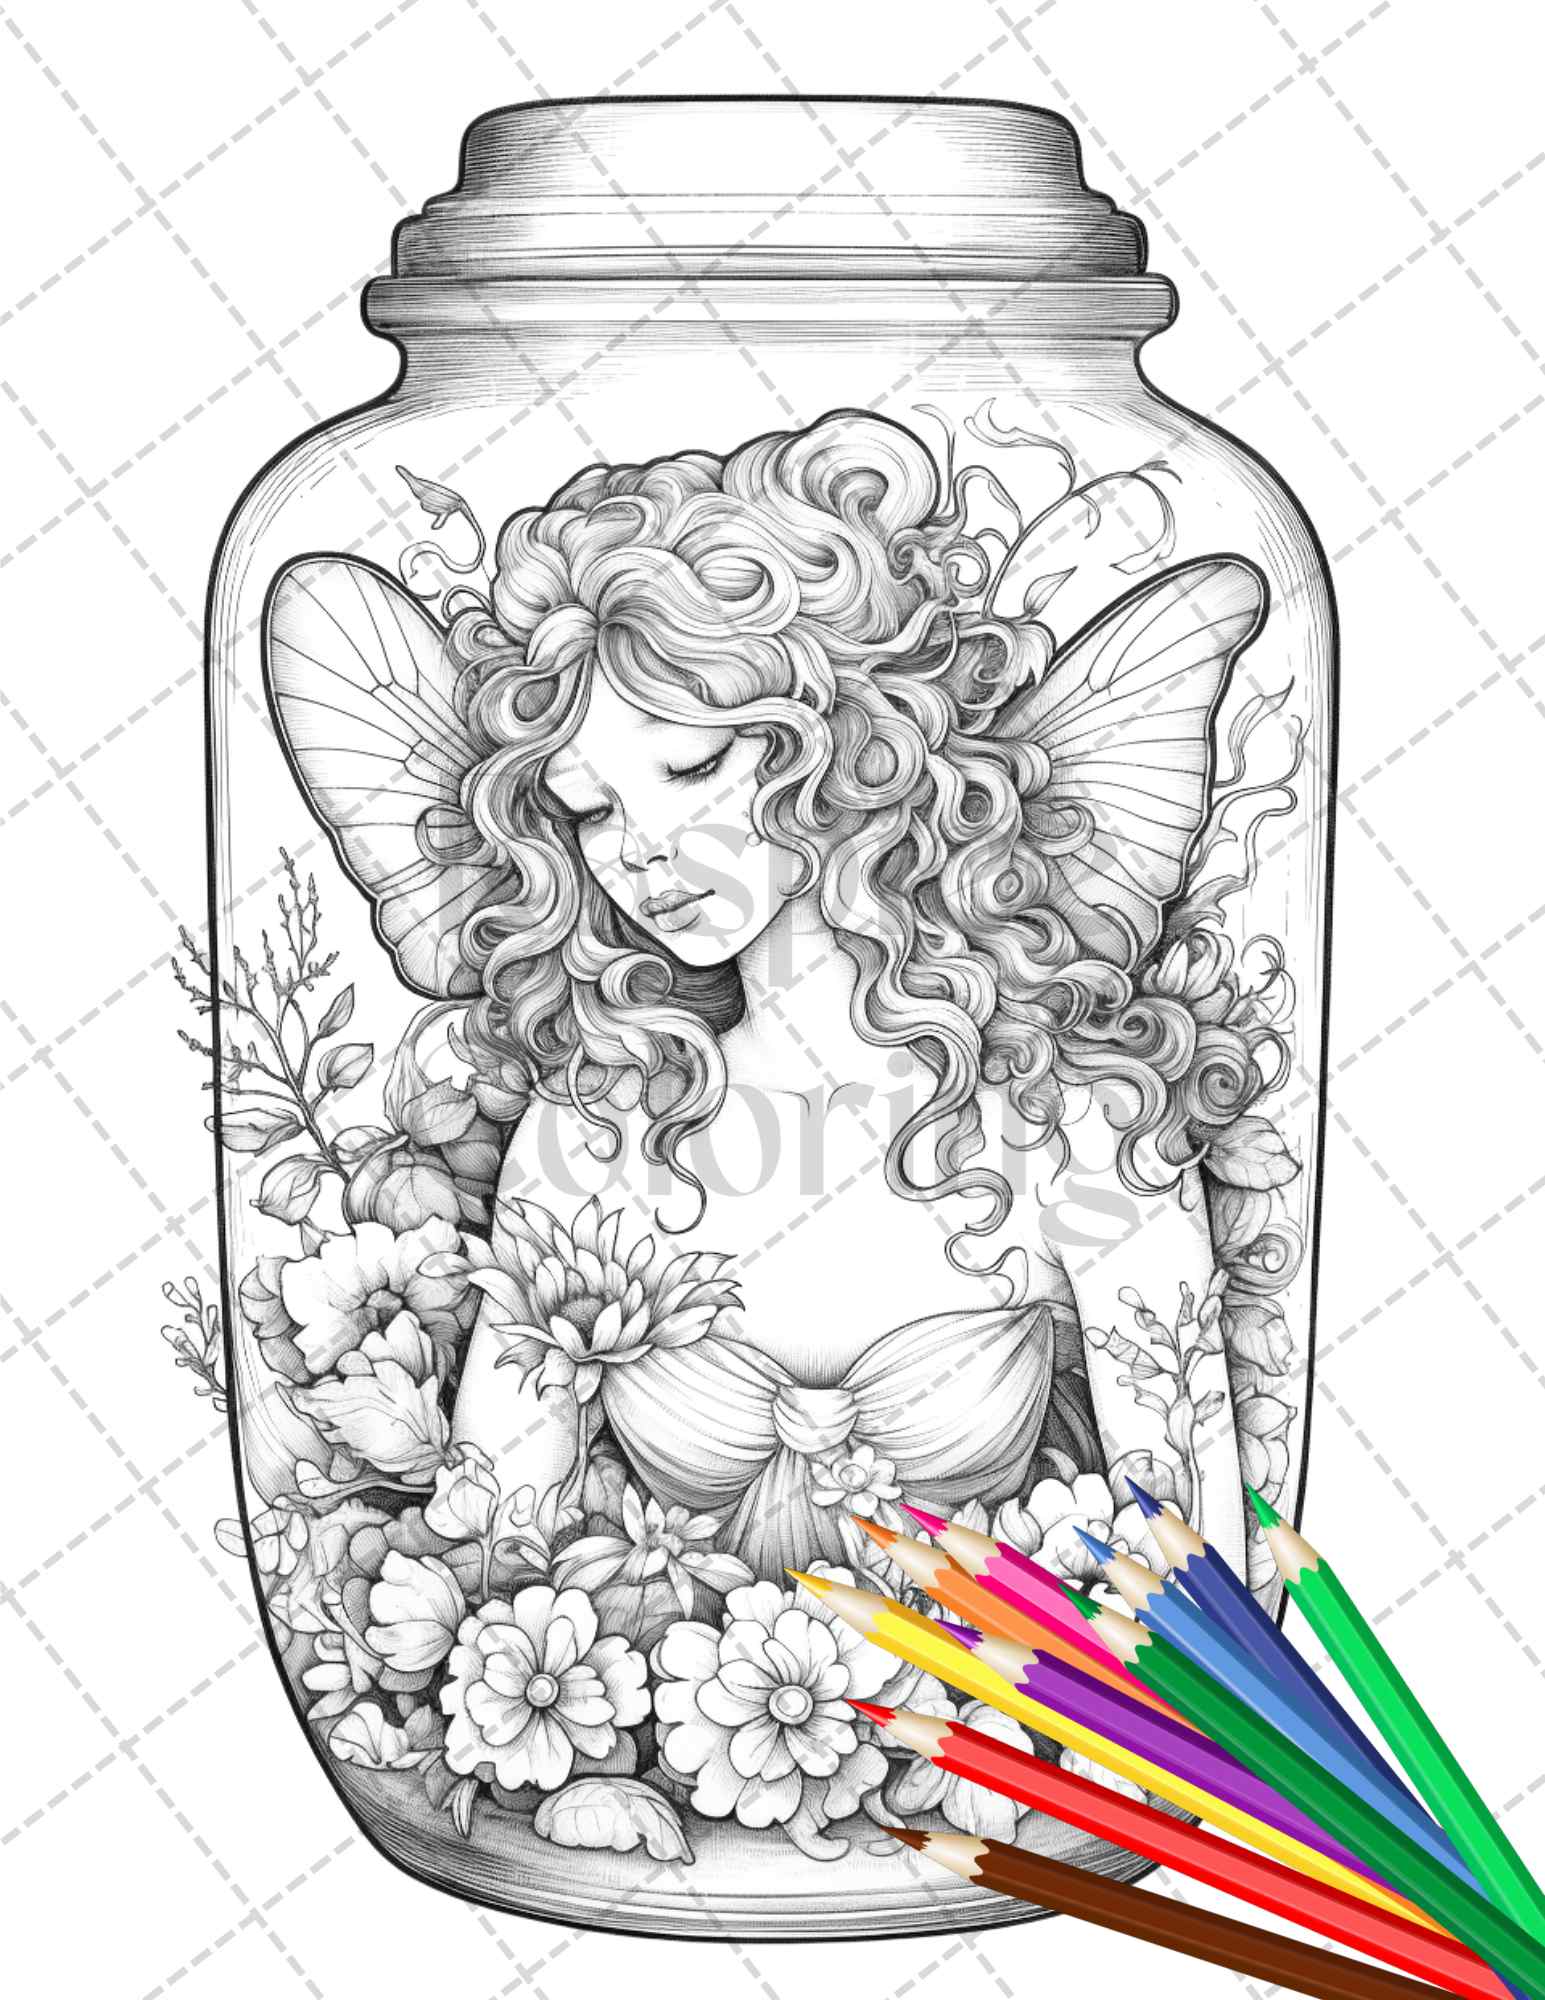 50 Printable Fairy Houses in Jar Coloring Pages for Adults, Grayscale